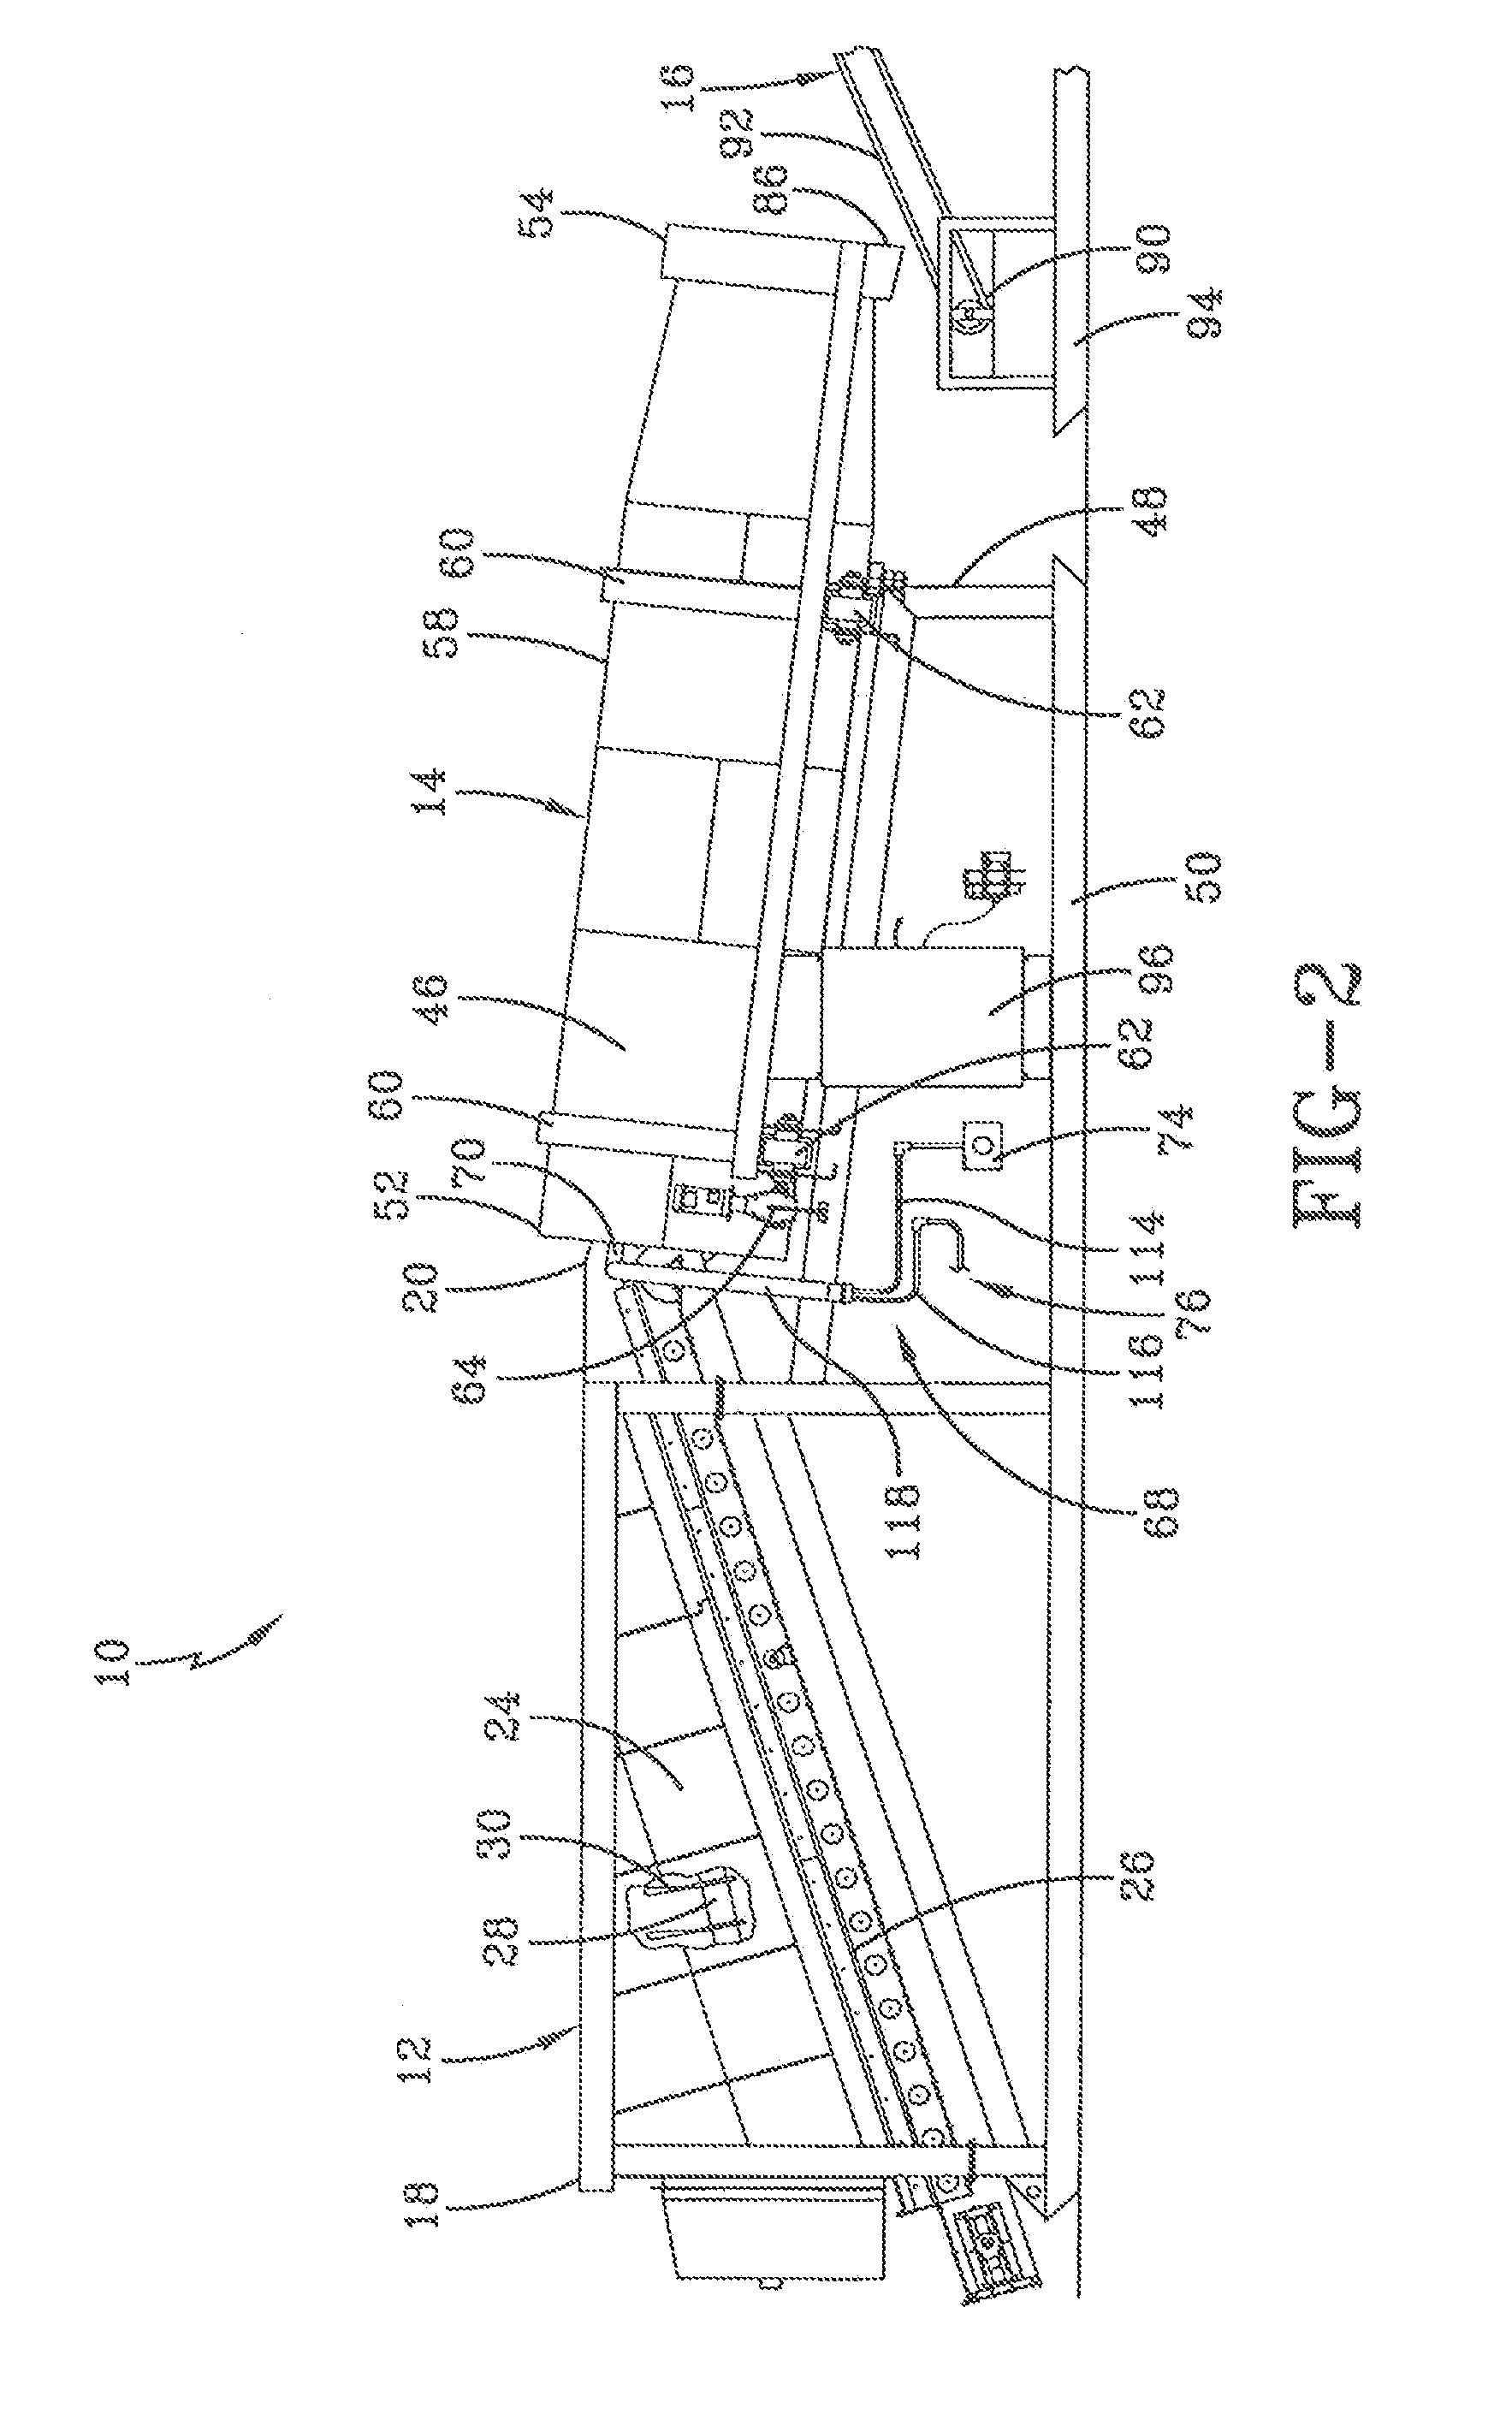 Apparatus and method for coloring landscape material